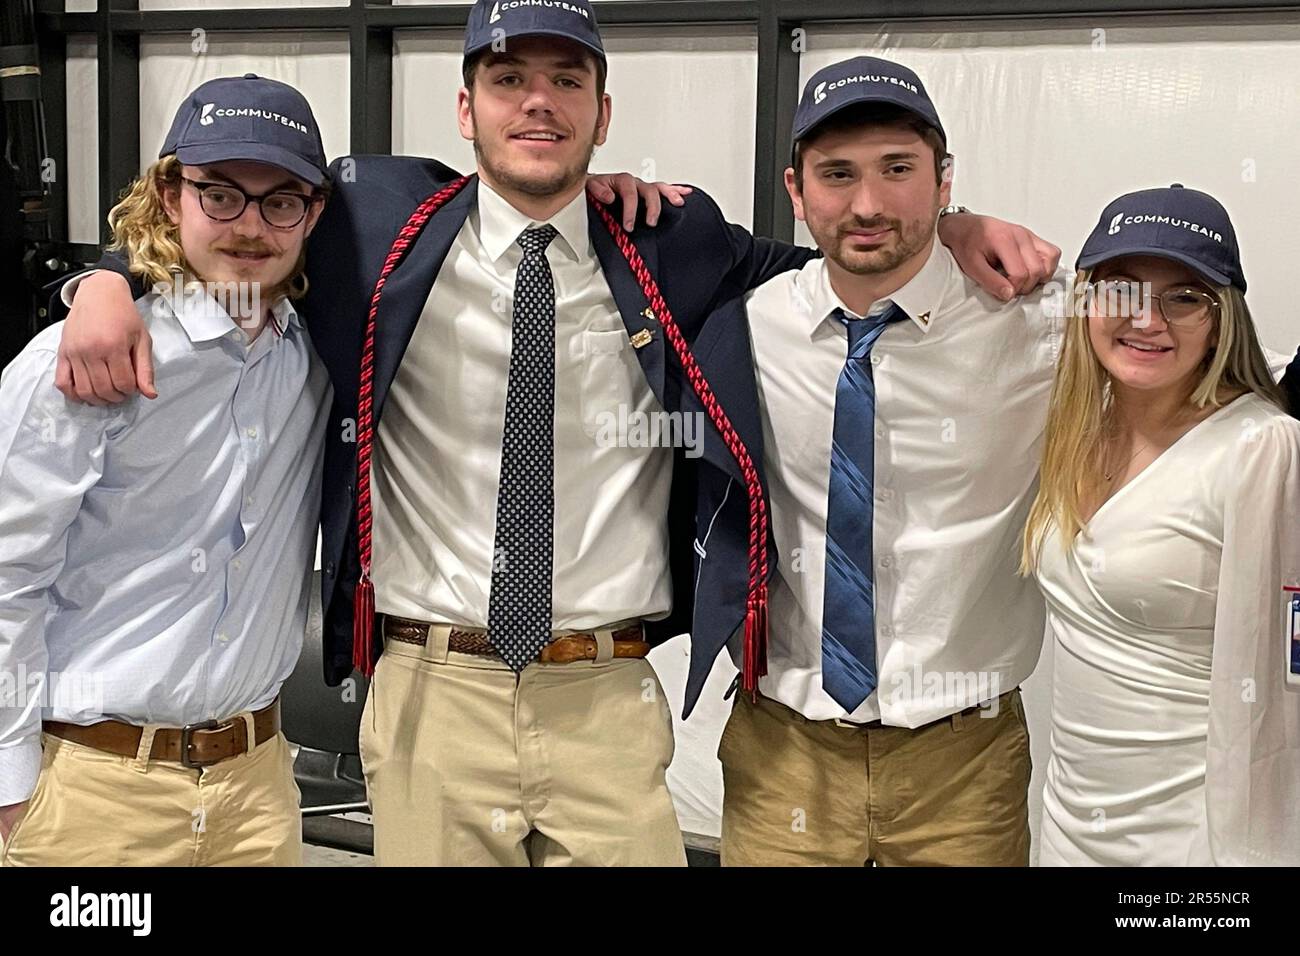 Students, from left, James Holt, Will Gower, Nicholas Colasacco, and  Savannah Gibson, all 21, pose for a photo in Hagerstown, Maryland on  Tuesday, April 25, at graduation from the Pittsburgh Institute of